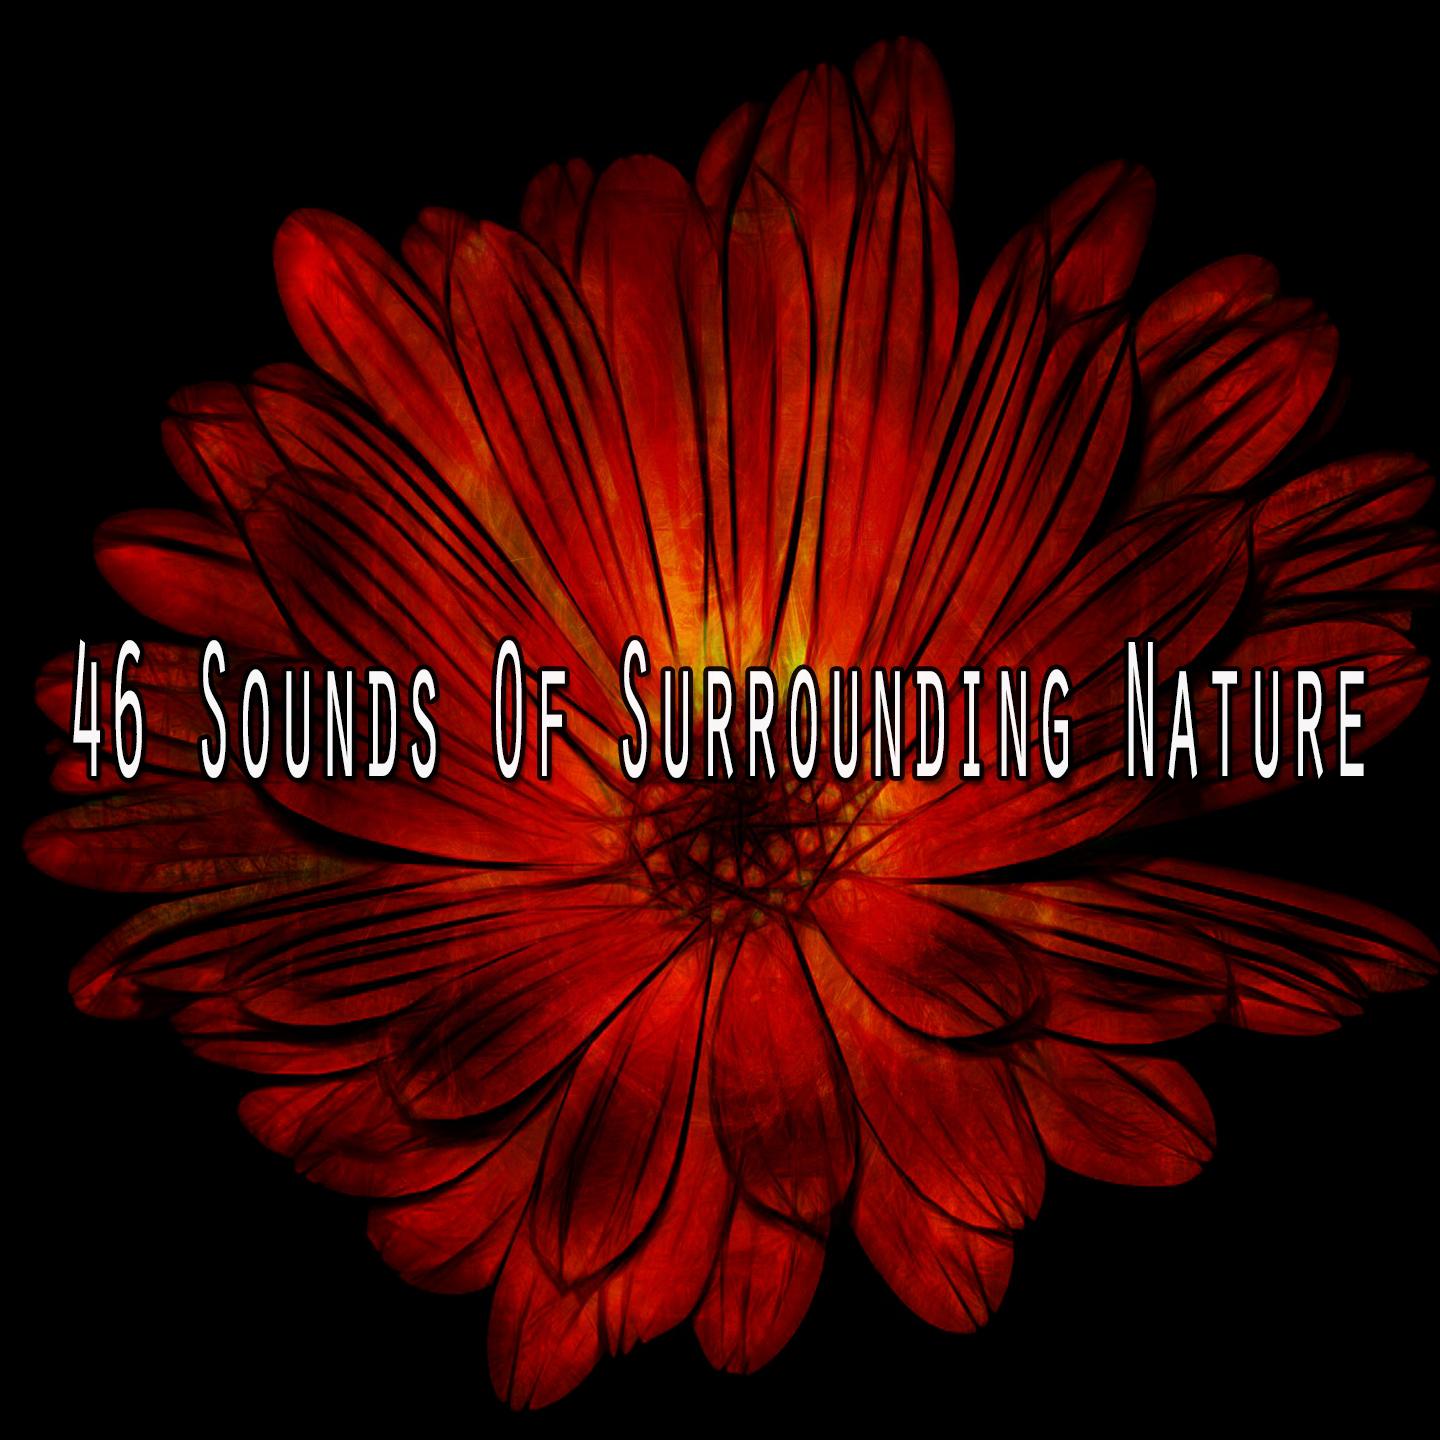 46 Sounds Of Surrounding Nature